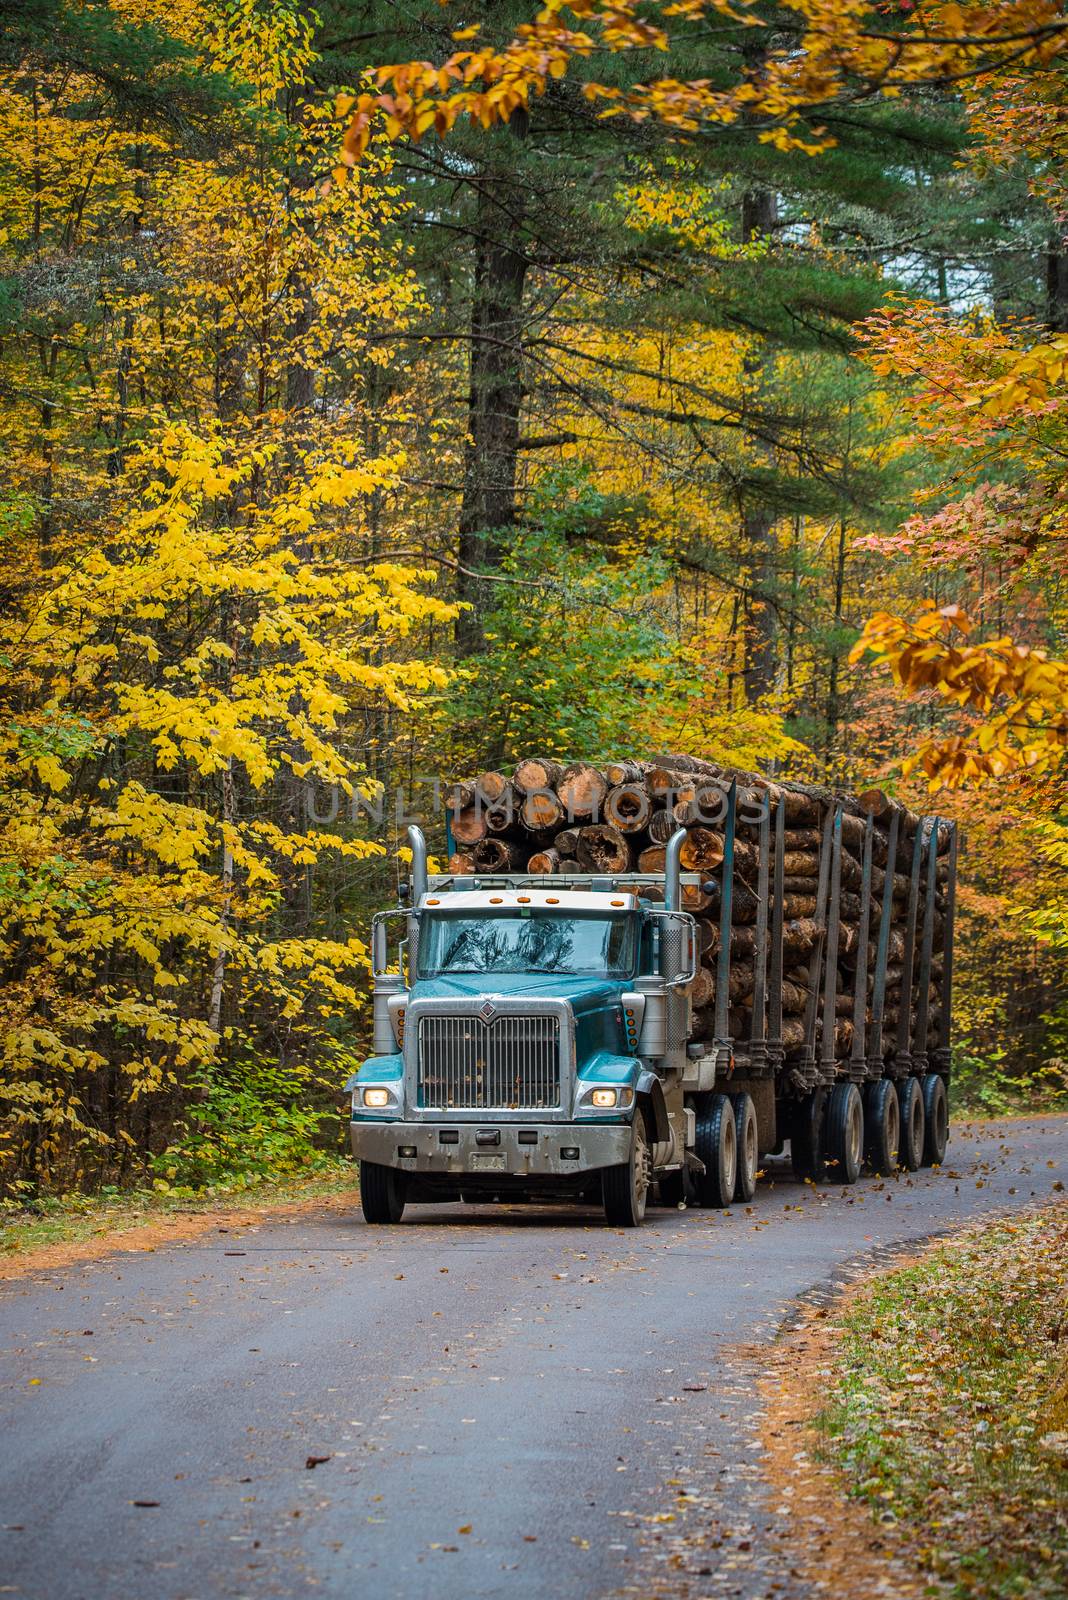 A logging truck hauling its load out of the woods.